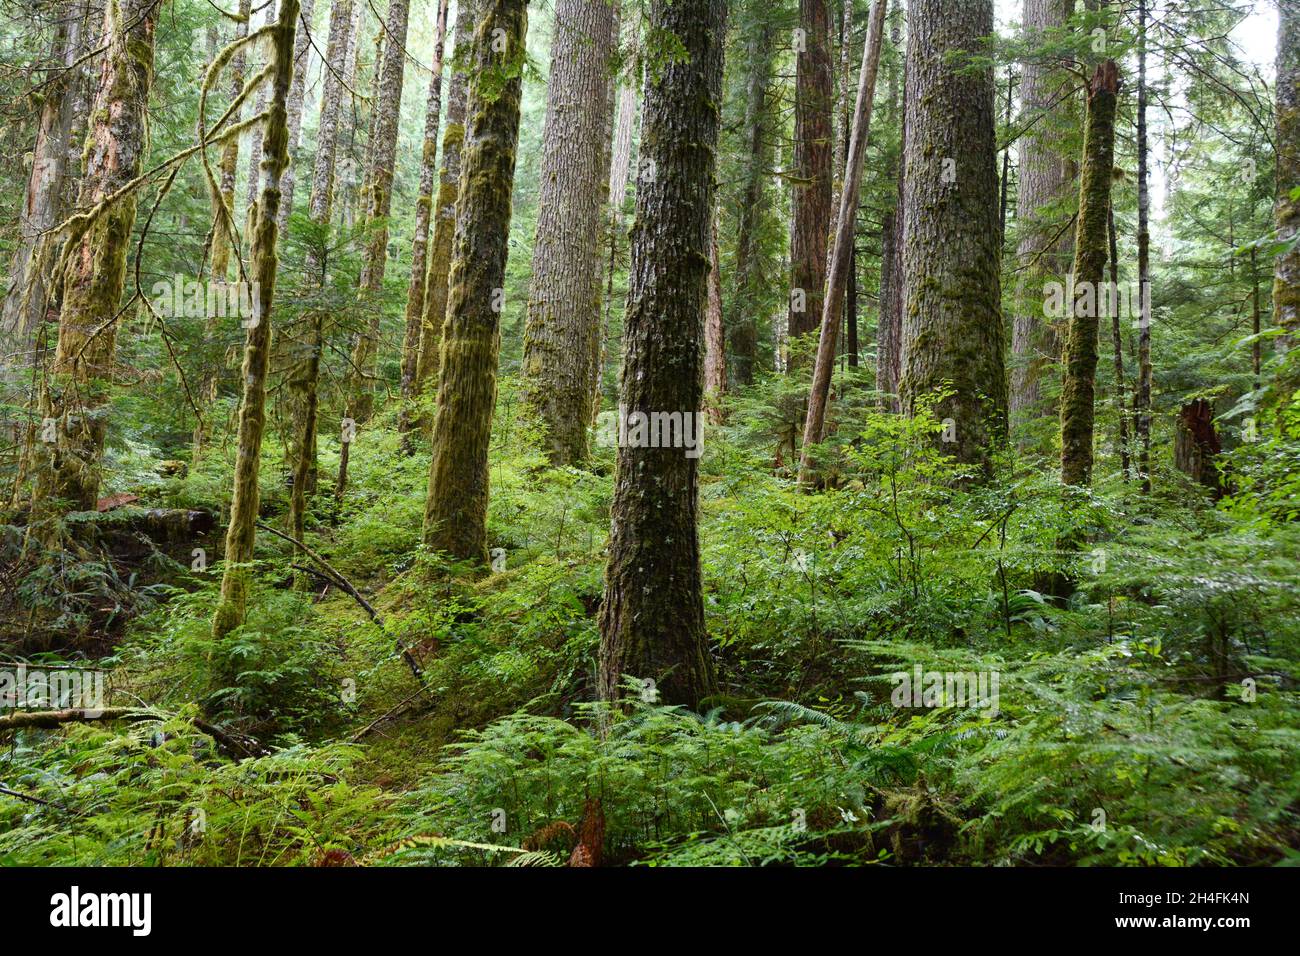 Conifer trees in a pristine old growth forest on the Sunshine Coast hiking Trail, near Powell River, British Columbia, Canada. Stock Photo